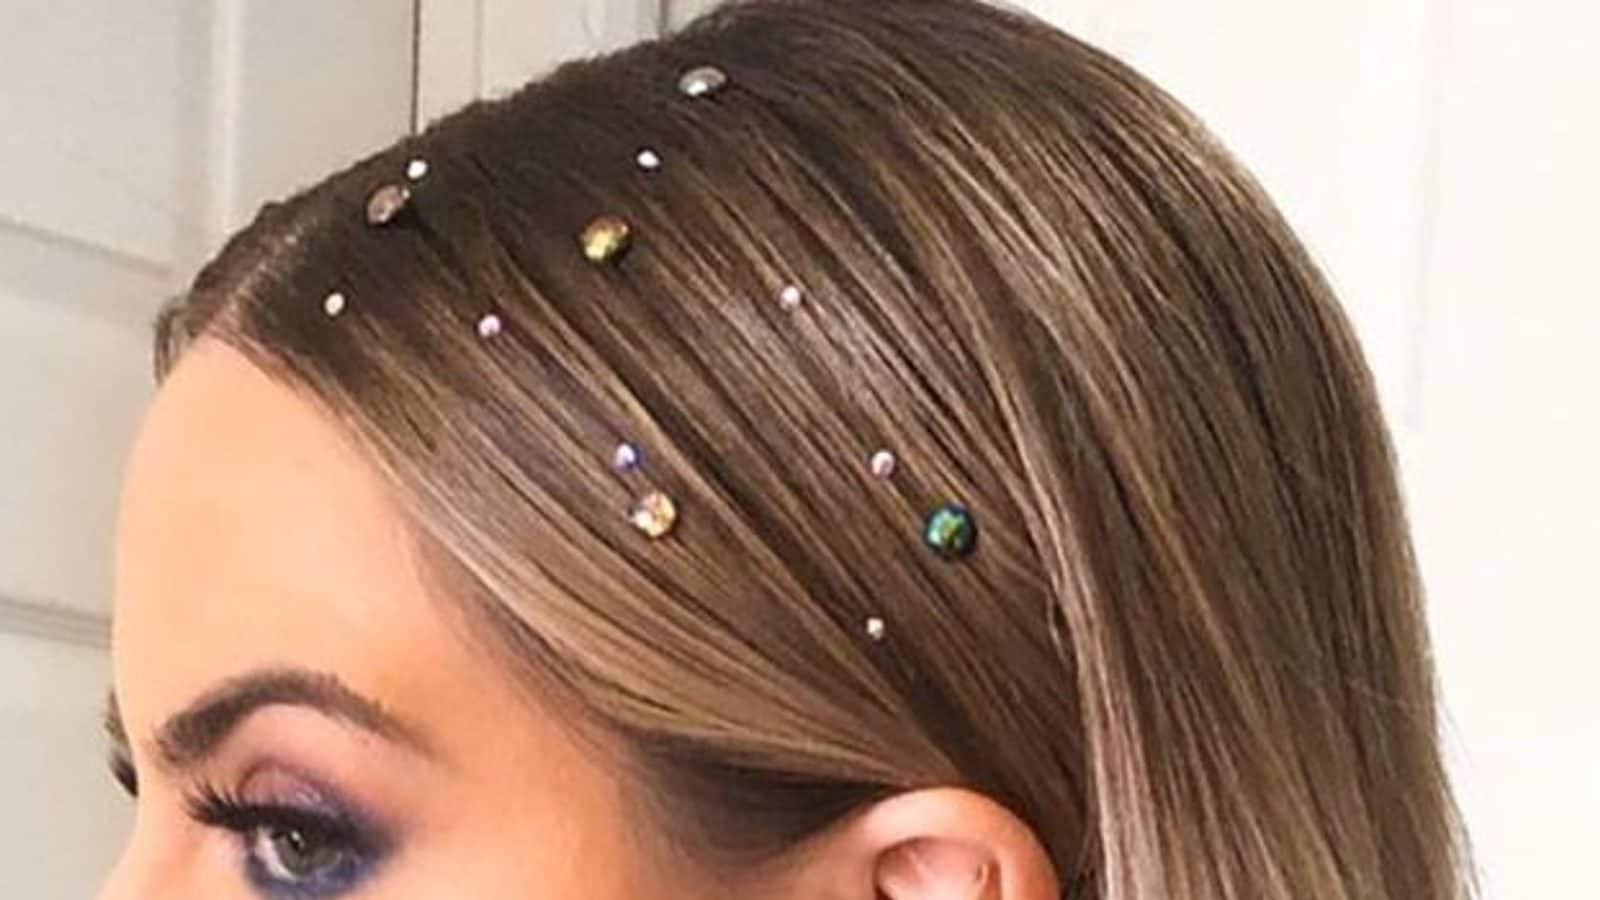 Y2K Hair Gems Are Back And Trending This Fall